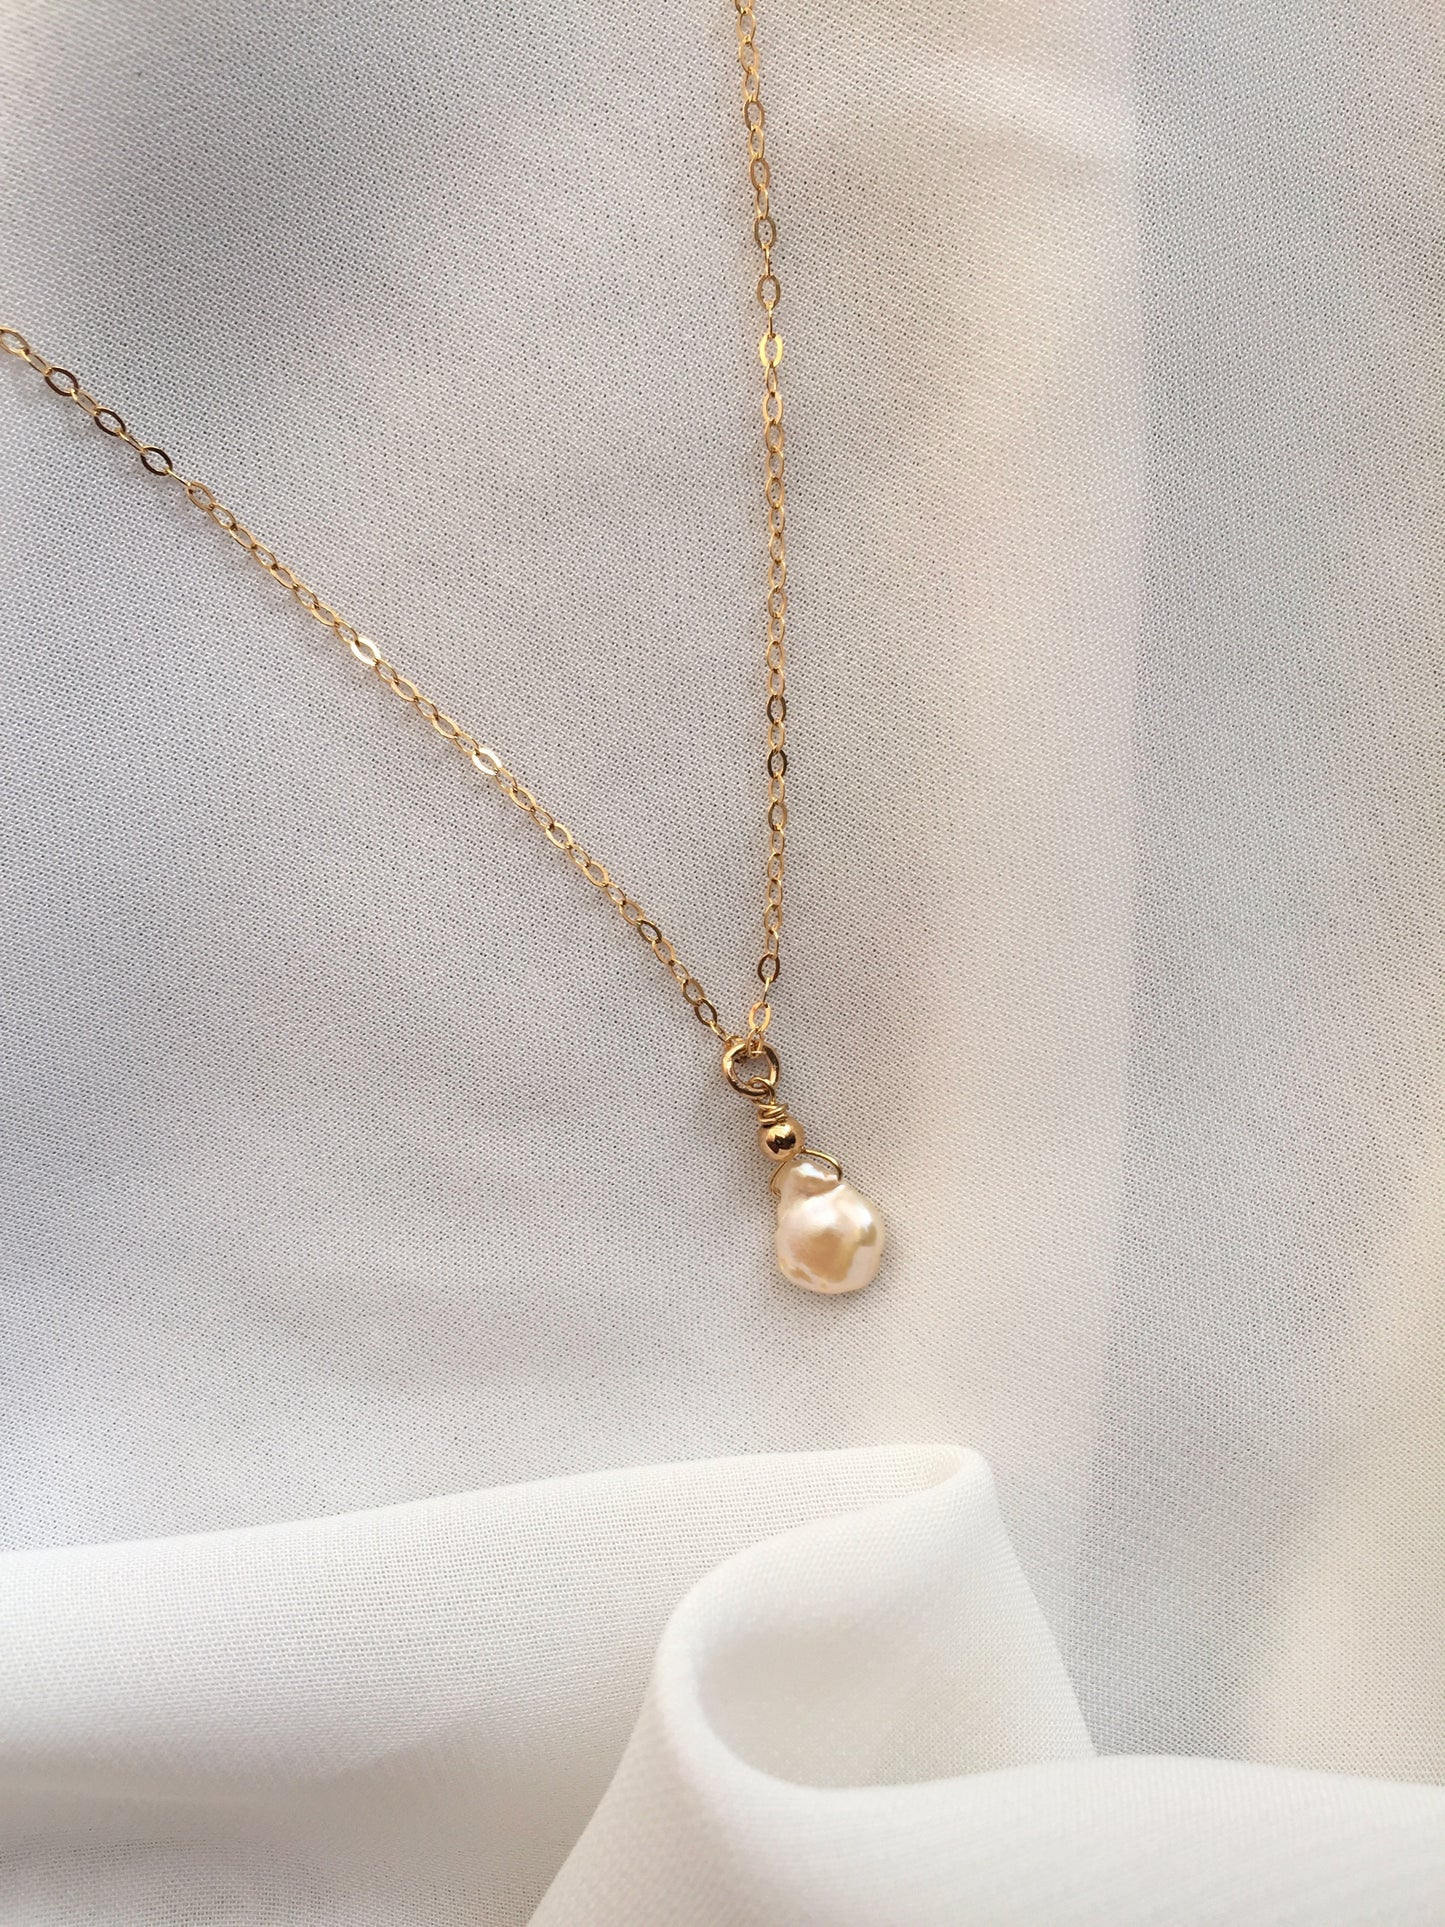 Organic Pearl Drop Necklace | Dainty Single Pearl Necklace | IB Jewelry